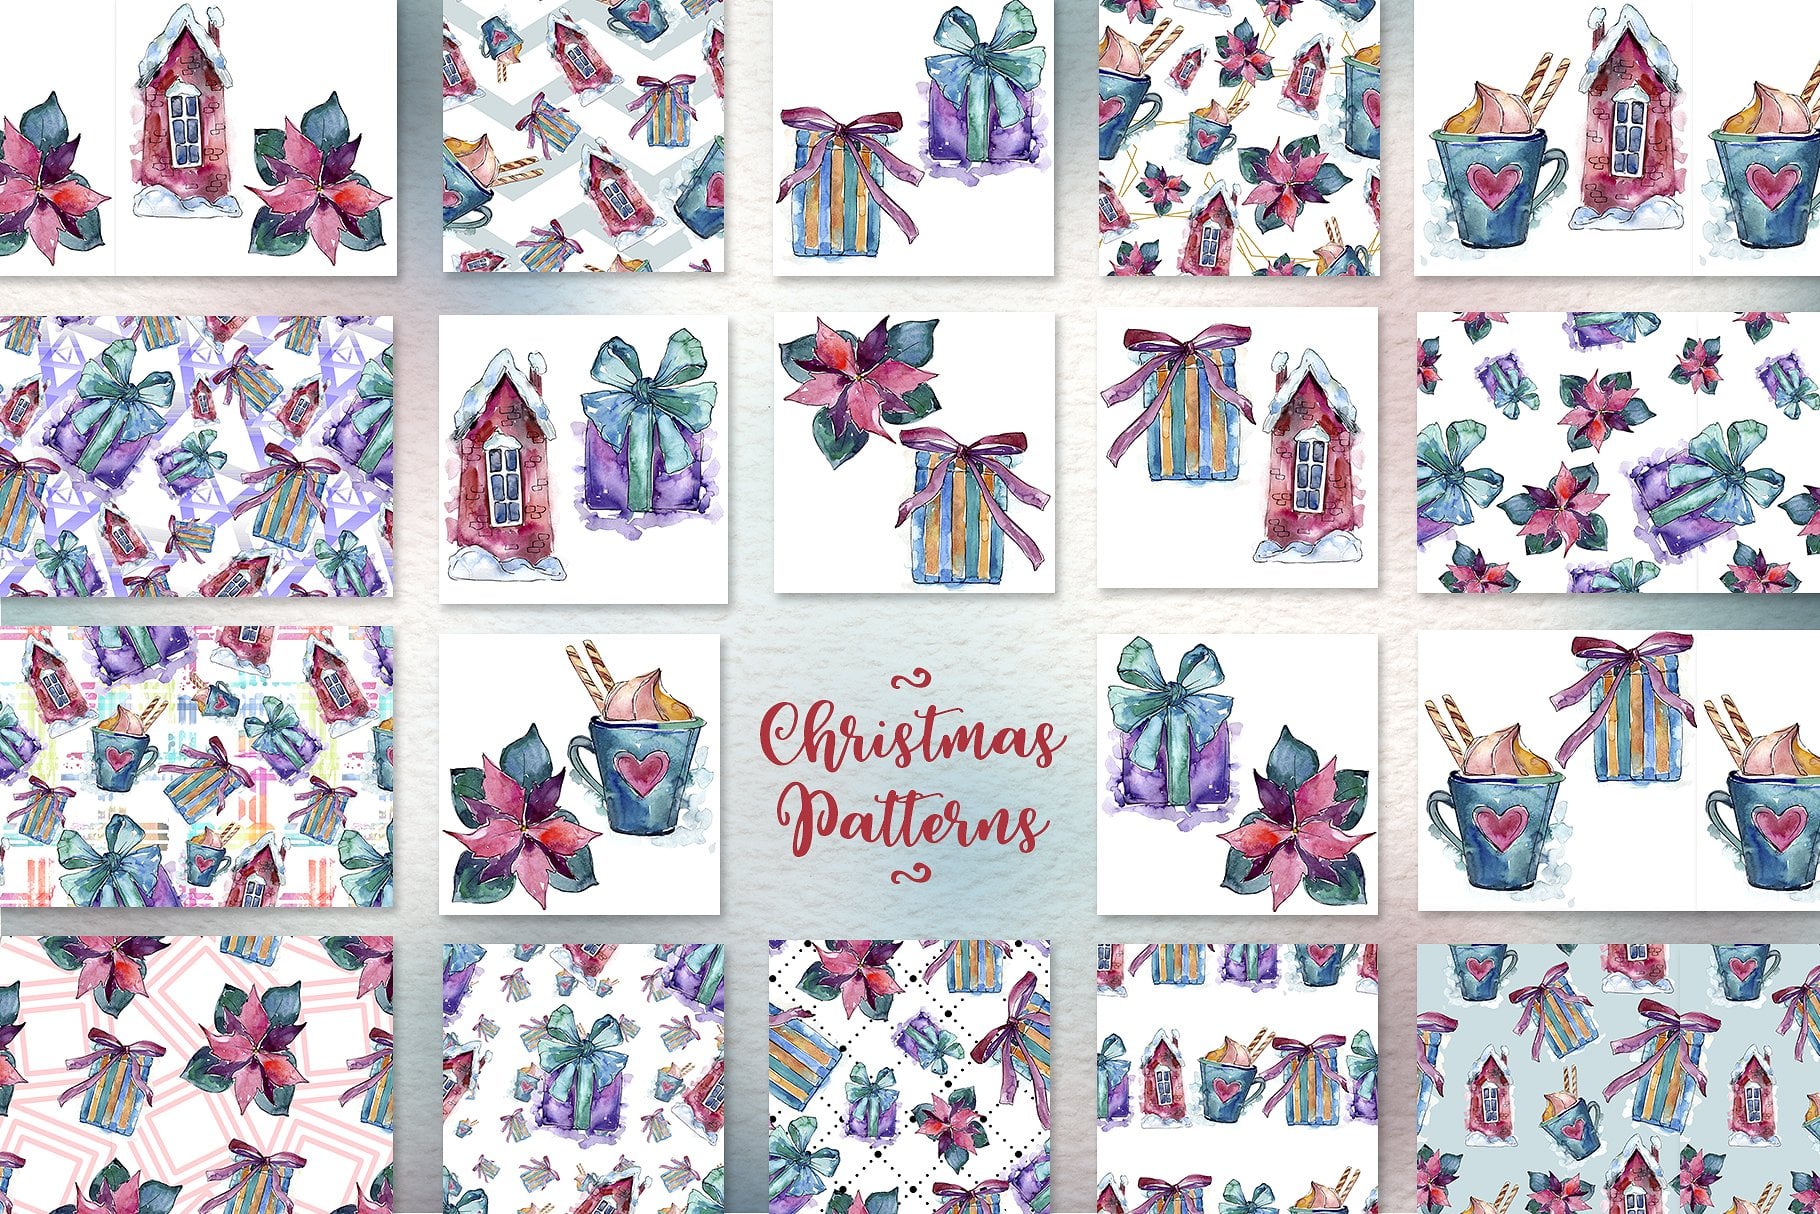 High quality watercolor Christmas patterns.